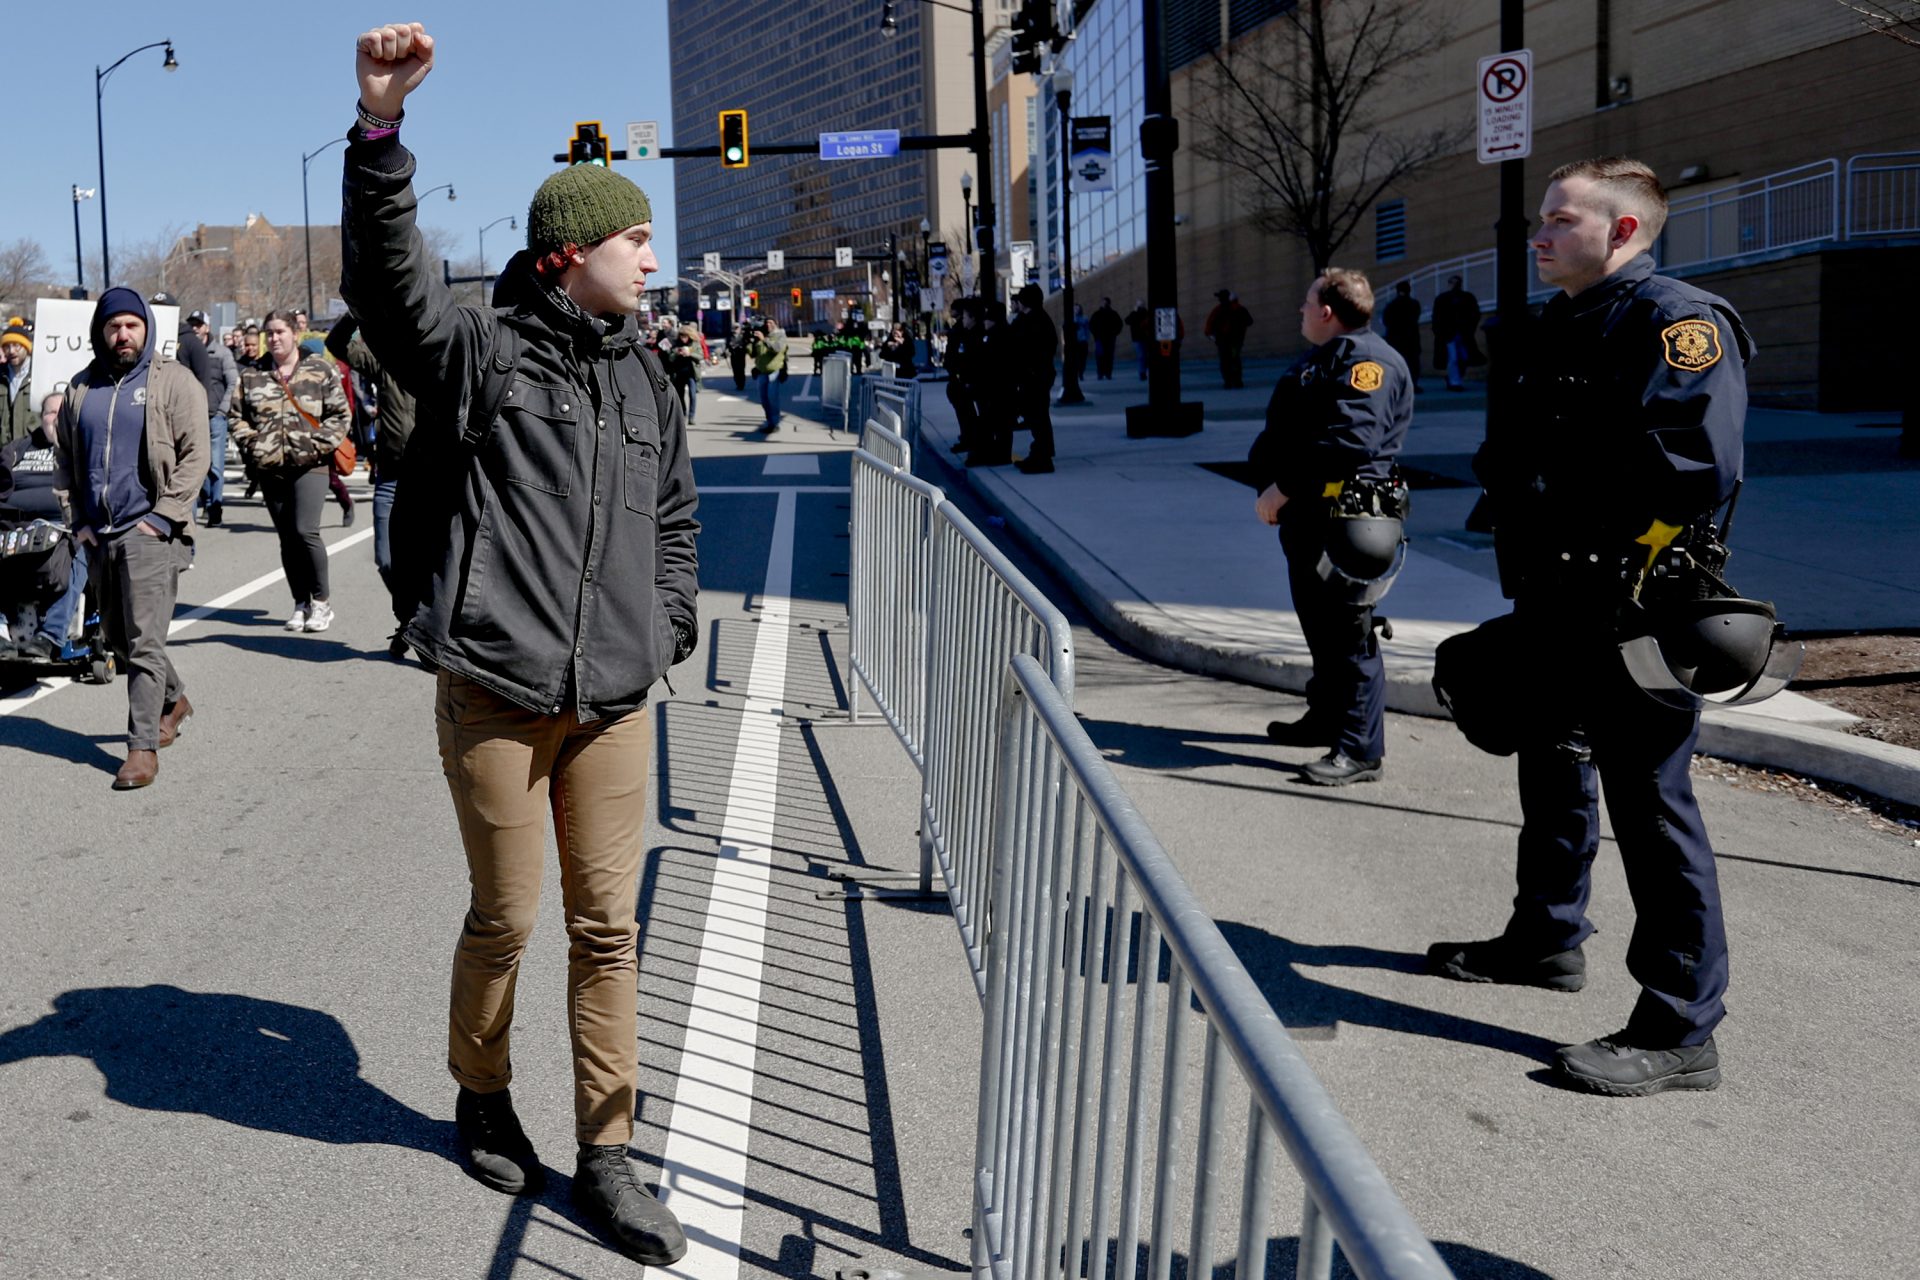 In this March 23, 2019 file photo, a marcher holds up his fist while staring at police lined up in front of PPG Paints Arena in Pittsburgh during a protest after a former suburban police officer was acquitted of a homicide charge in the on-duty shooting death of Antwon Rose II in East Pittsburgh.